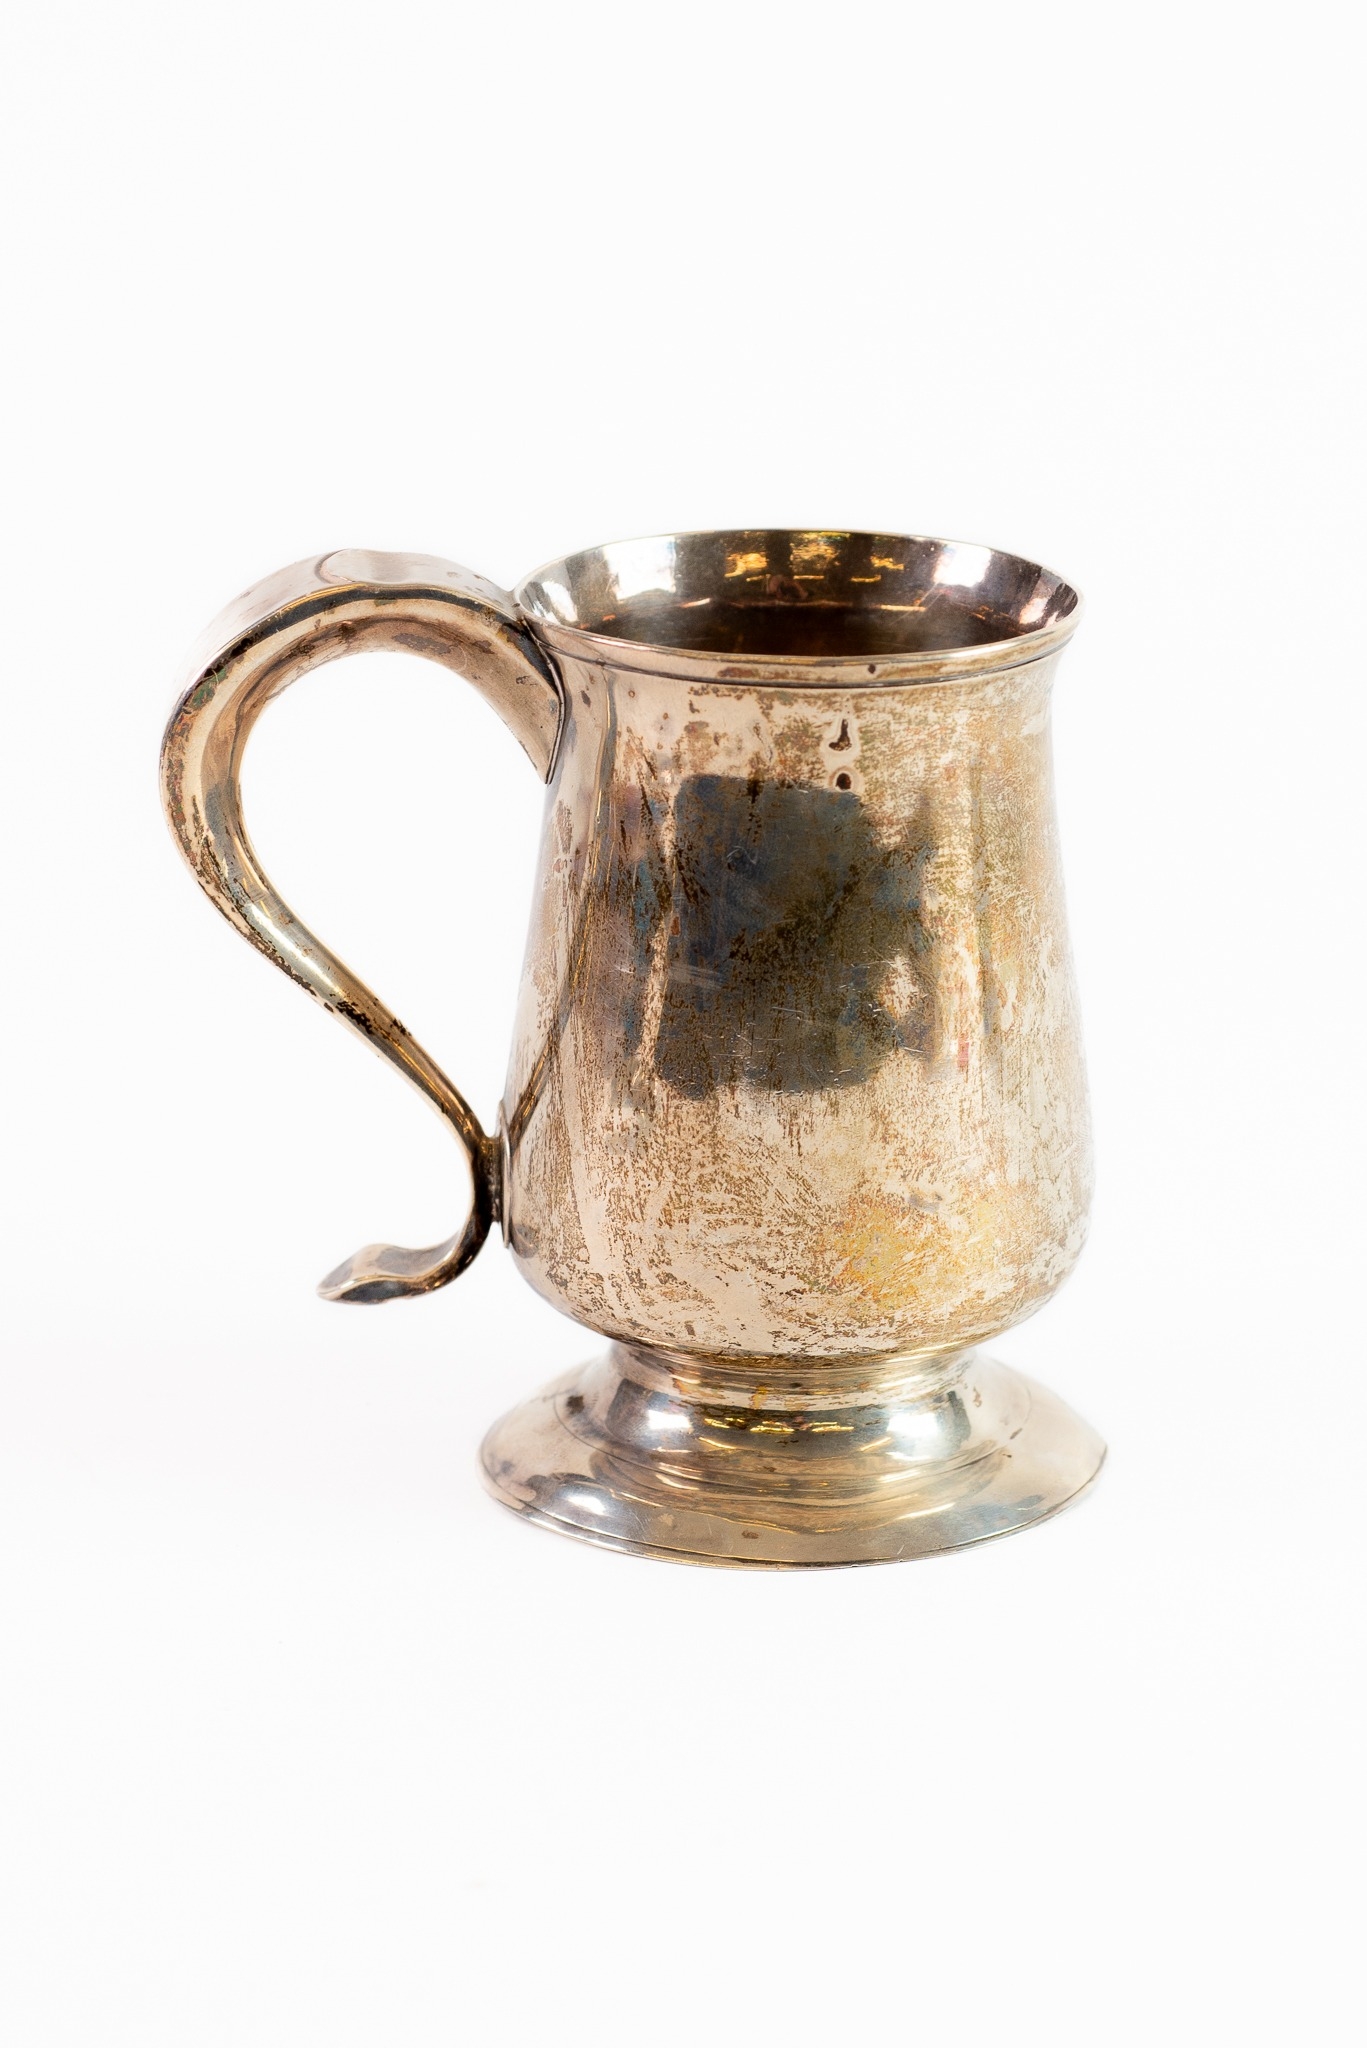 GEORGE II PLAIN SILVER PINT TANKARD BY JOHN LANGLANDS I & JOHN ROBERTSON I, of baluster form with